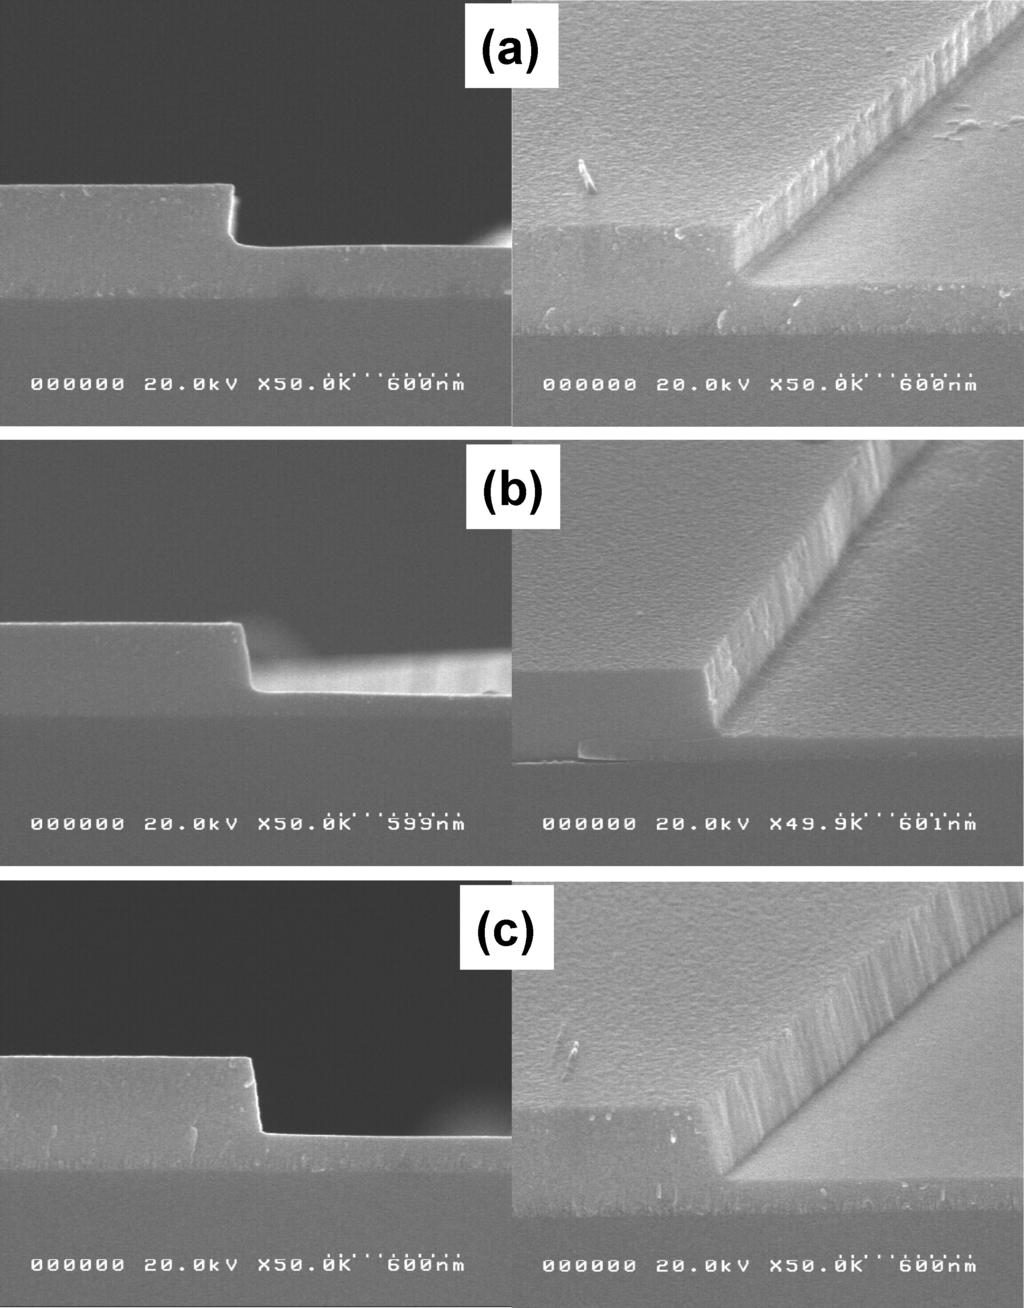 Inductively Coupled Plasma Reactive Ion Etching [1227]/101 As a next step, the effects of etch parameters on etch characteristics of GST films were systematically investigated at the HBr